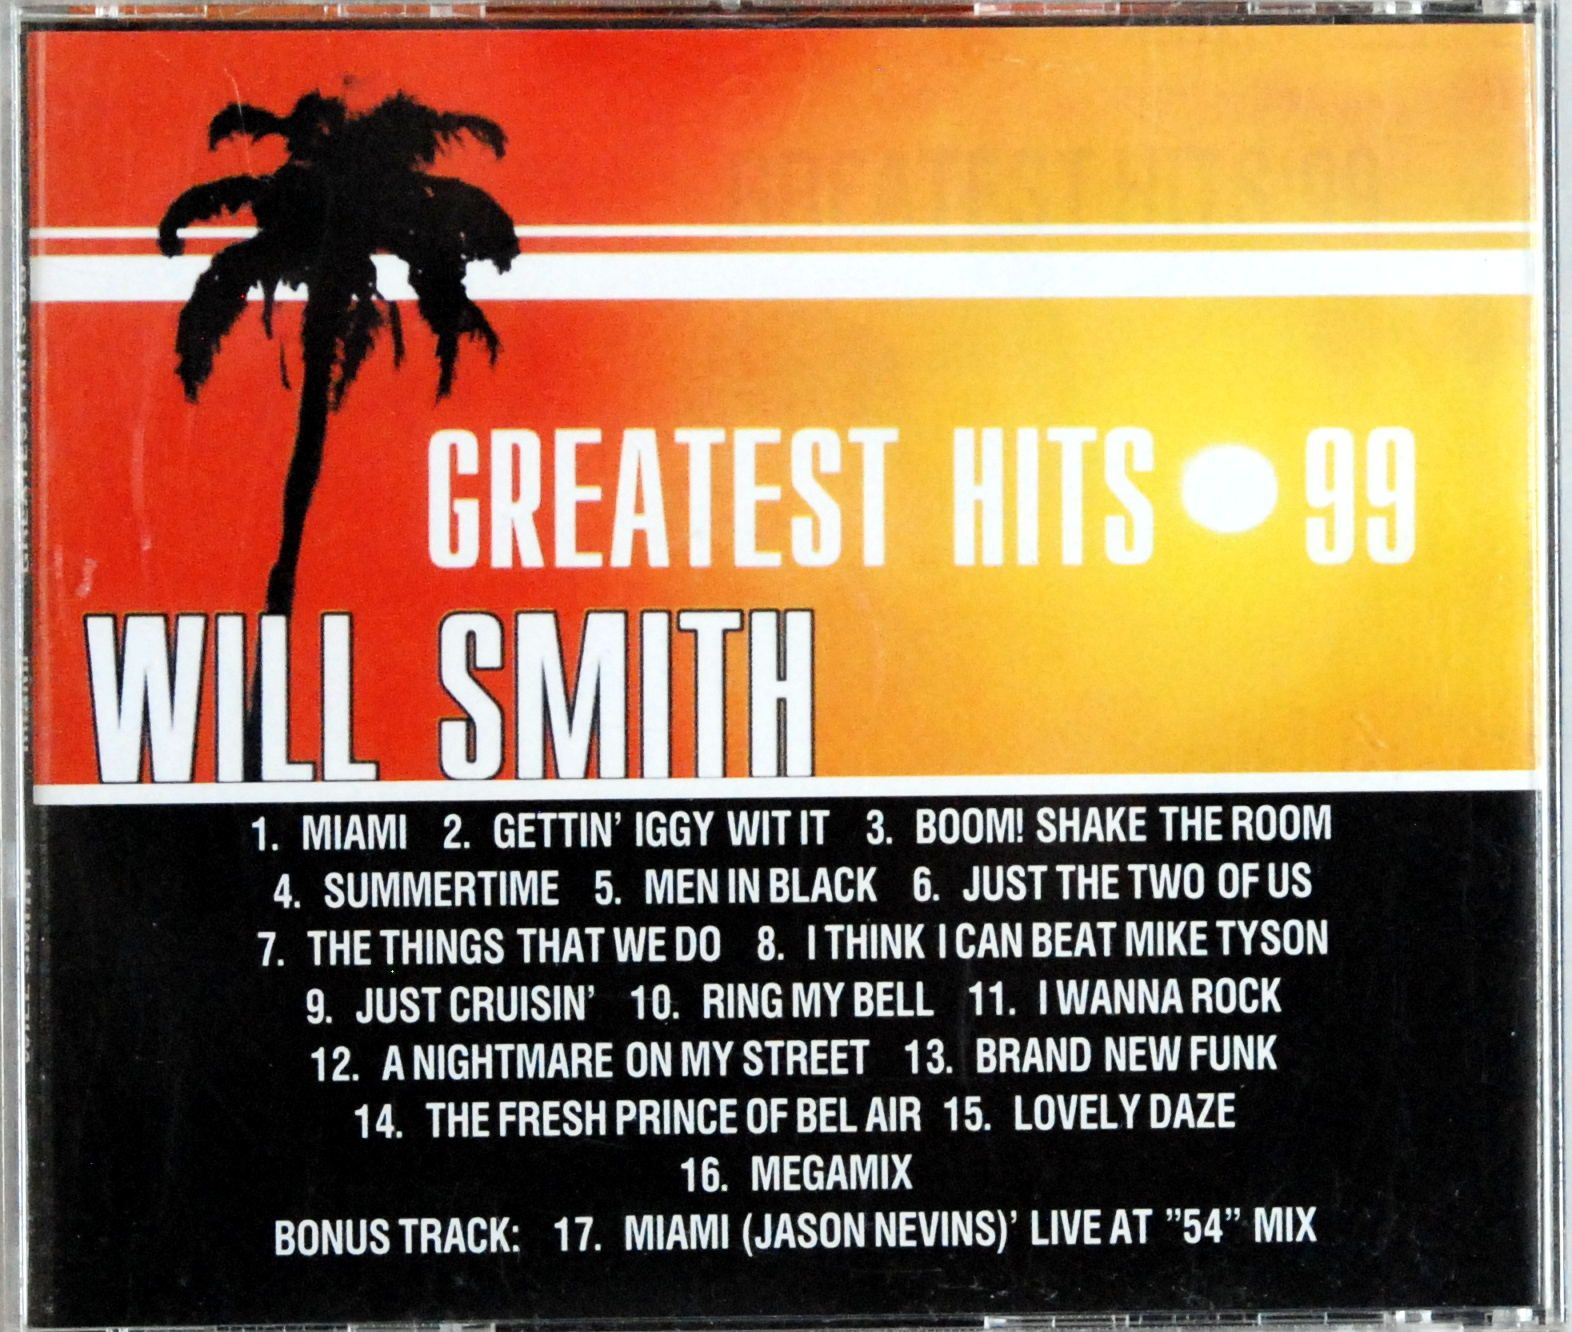 (CD) Will Smith - Miami - Greatest Hits '99 - Unofficial Release